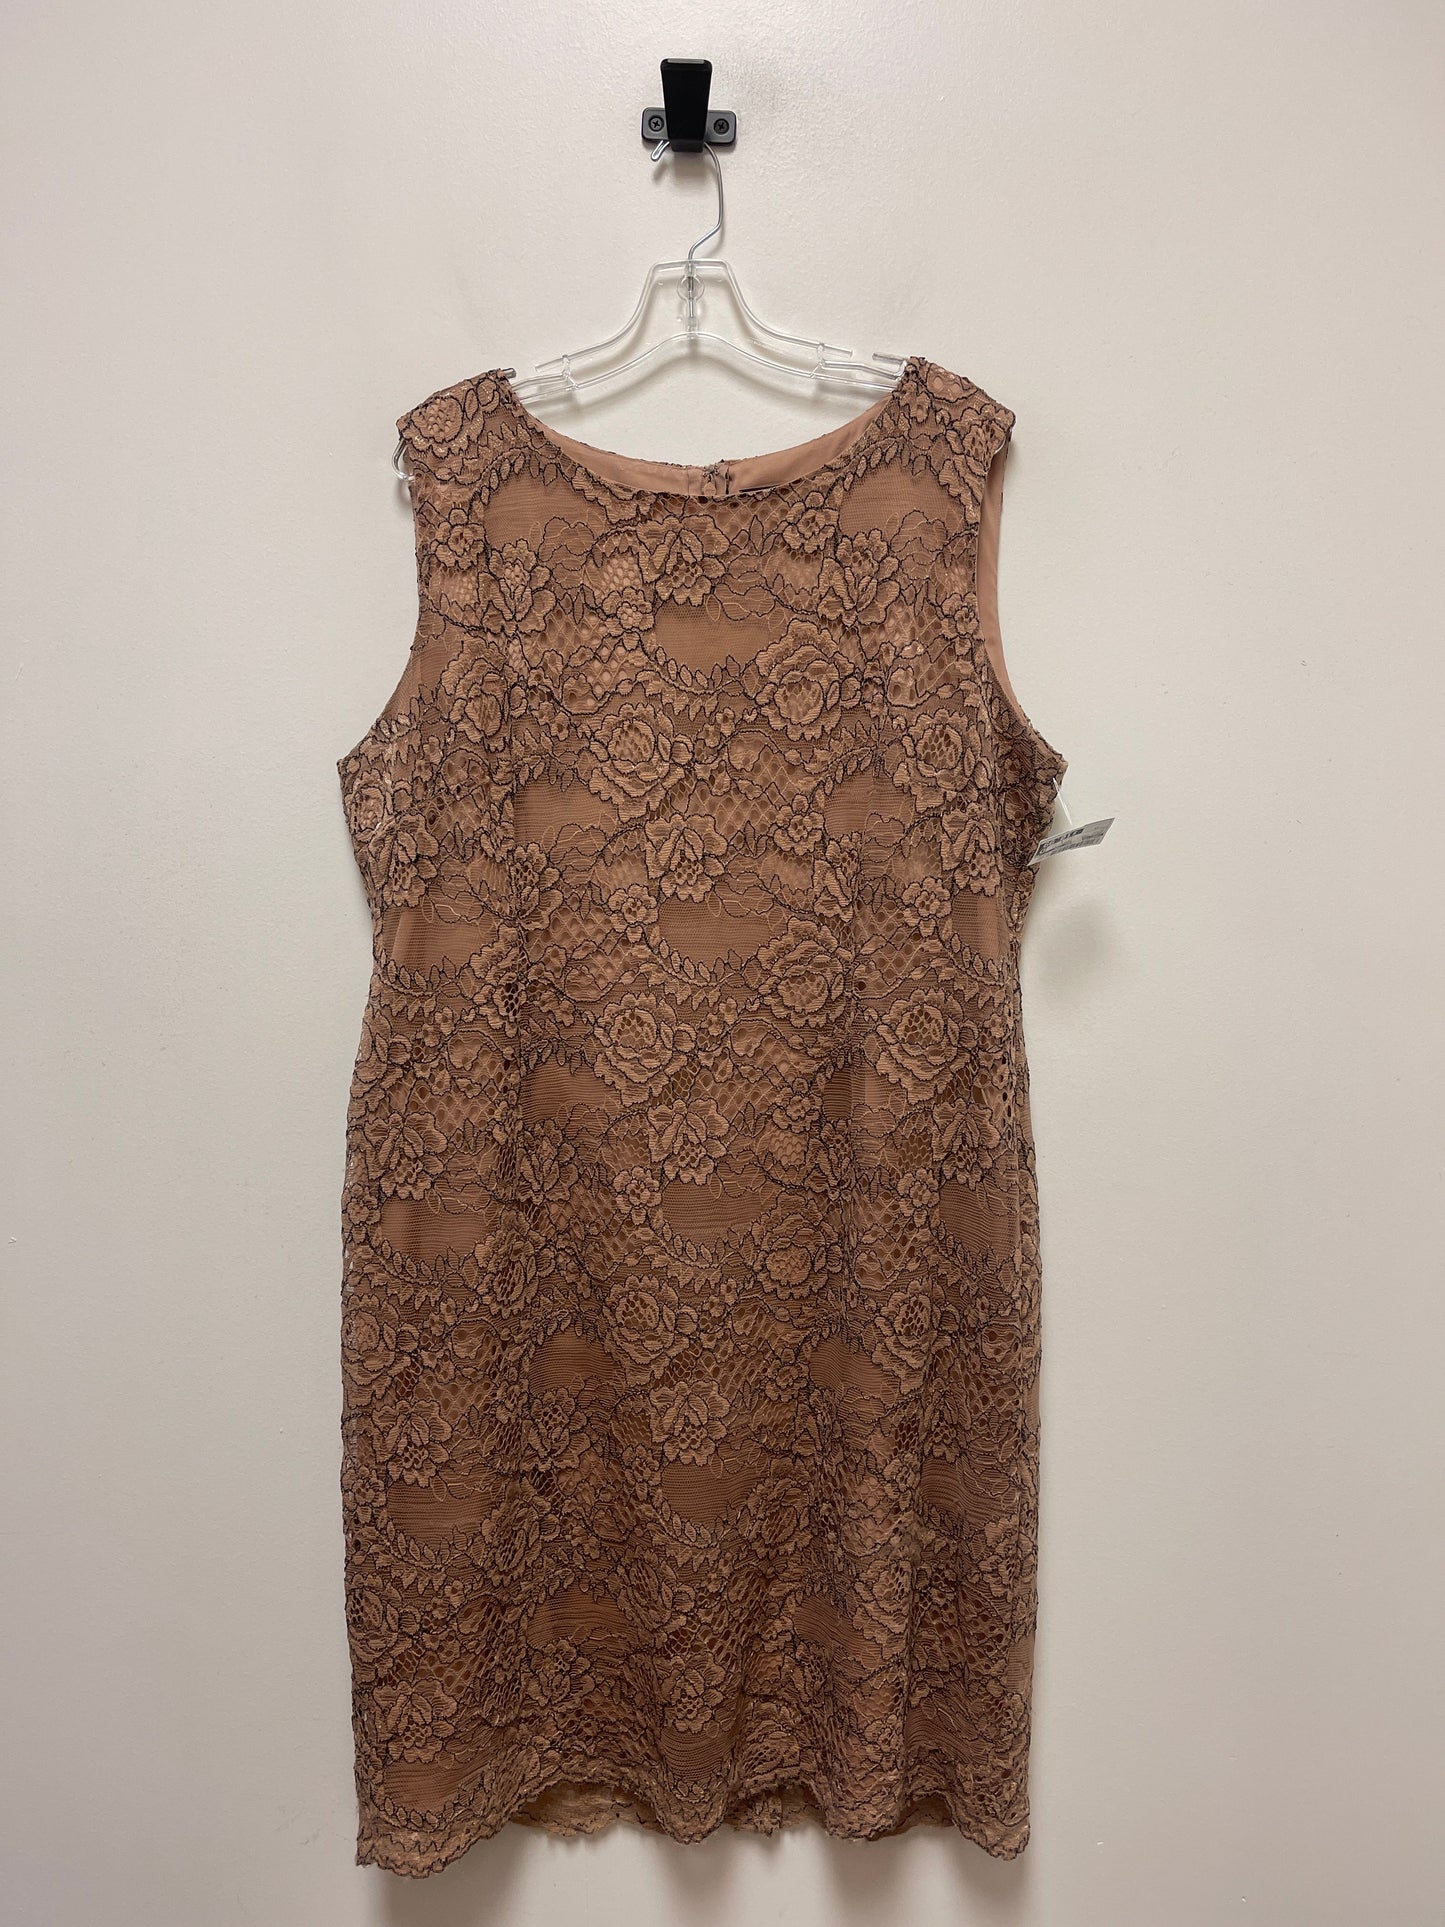 Dress Casual Short By Preston And New York  Size: 2x